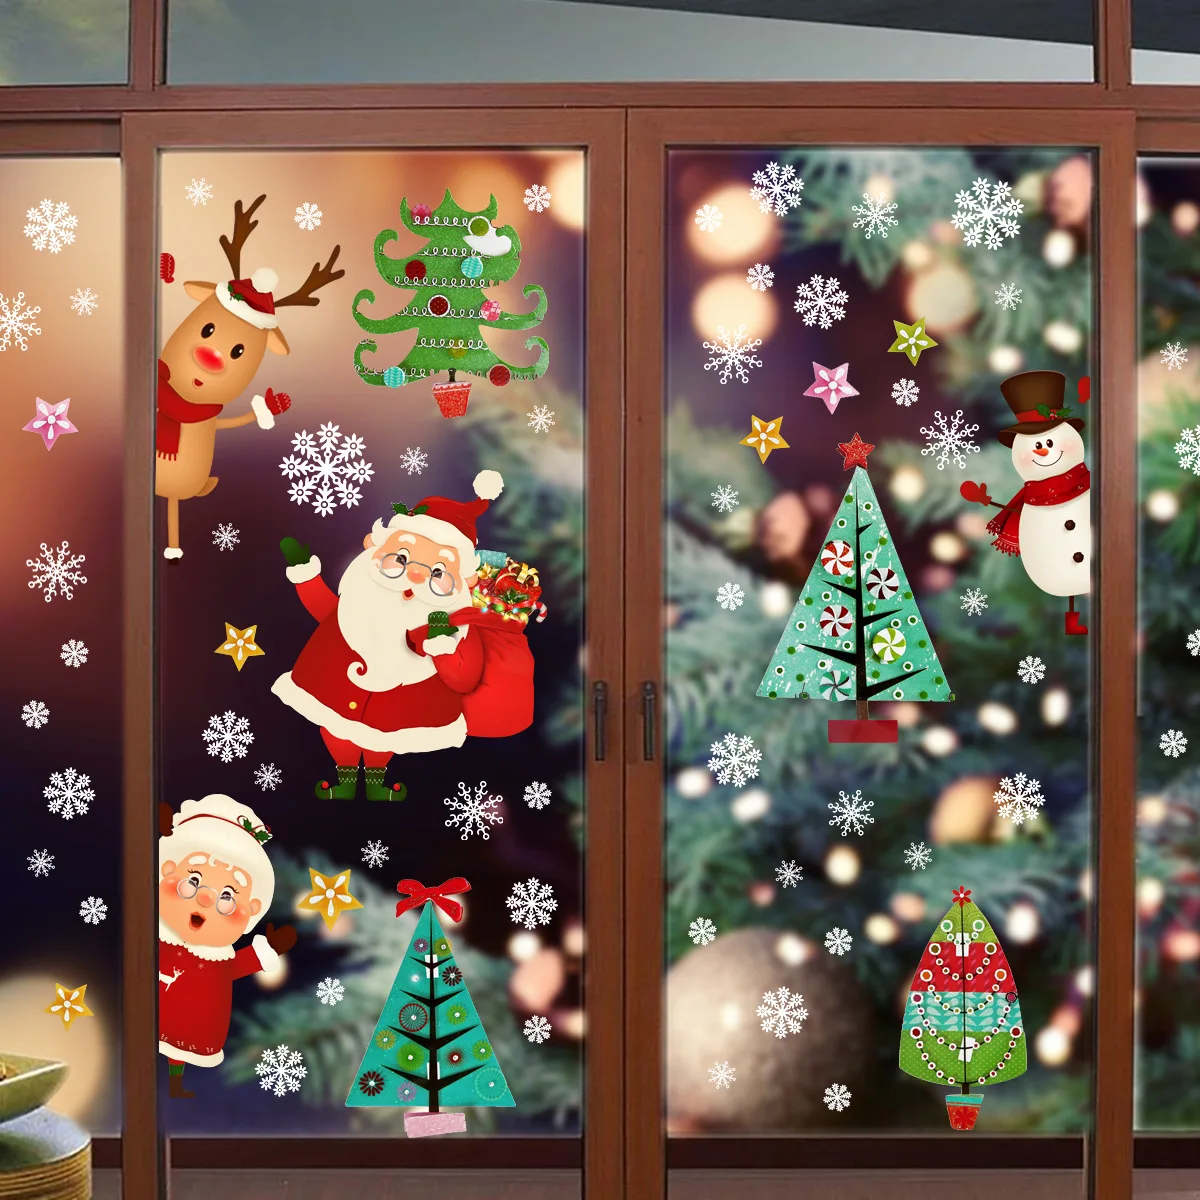 4pcs Santa Claus Snowflake Wall Sticker Christmas Electrostatic Sticker Window Glass Double-sided Decorative Funny Wall Sticker window glass scraper adjustable length mirror cleaner tool household double sided retractable window cleaning accessories